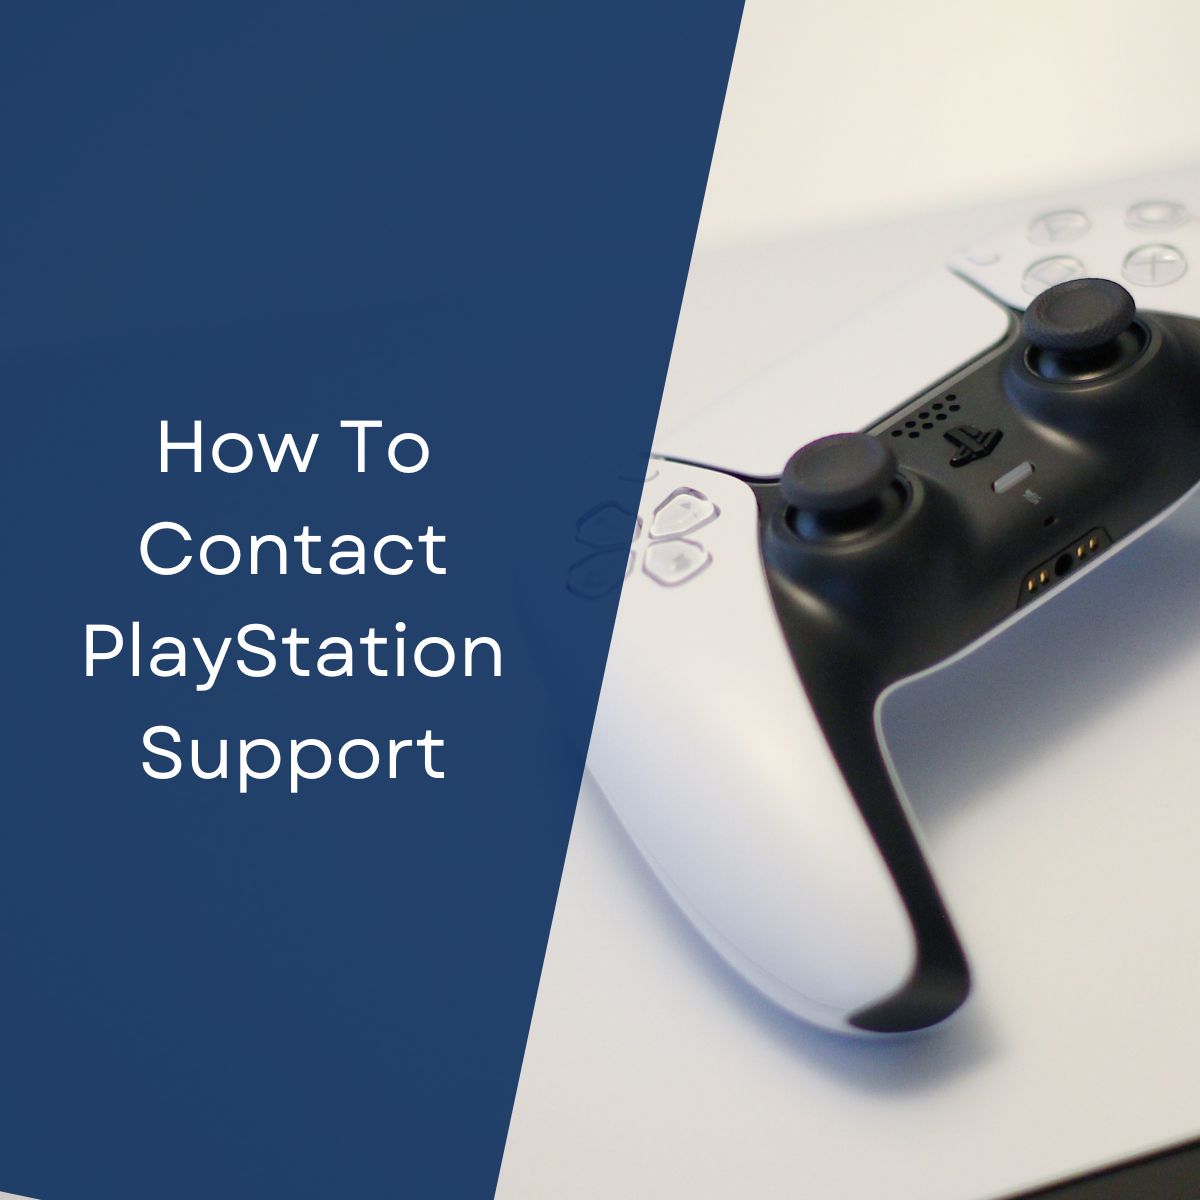 To Contact PlayStation Support (PlayStation Customer Service) June 2023